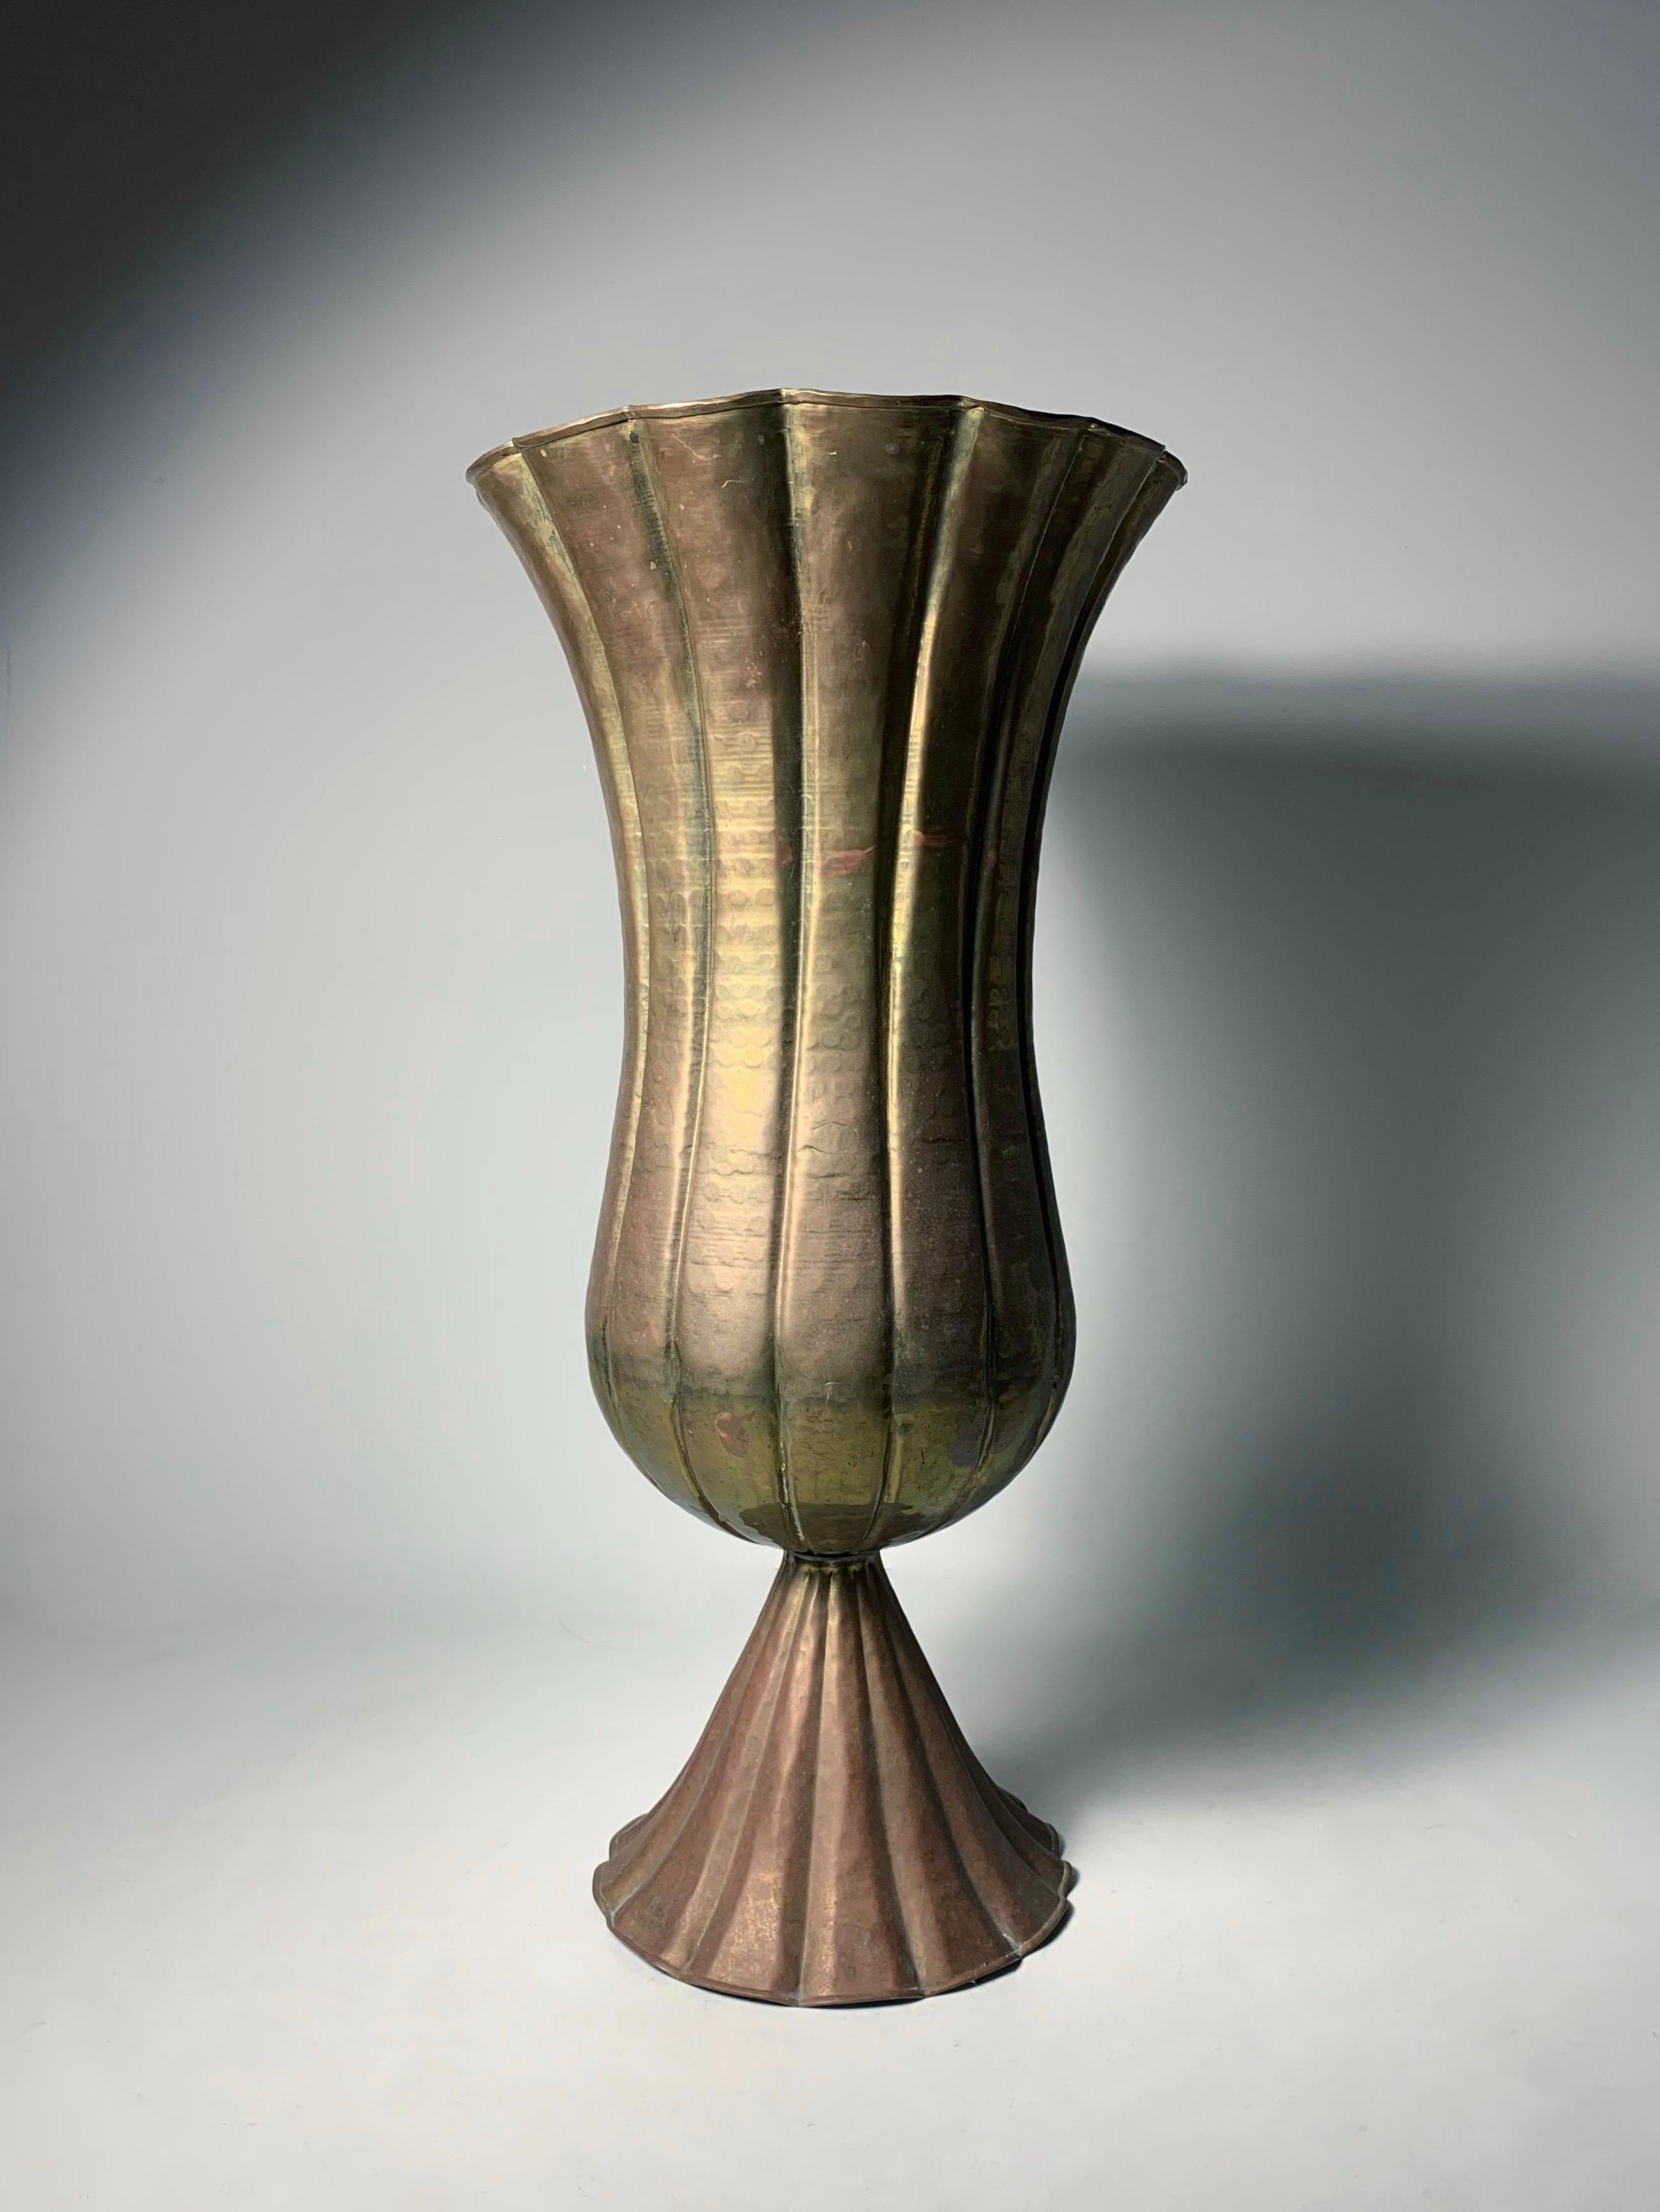 A Large Vintage Handmade Hammered Brass Planter vase. 

It is signed Silvestri on base. Family run business on the West Coast that executed fine garden elements and also imported merchandise from around the world to compliment their store. This